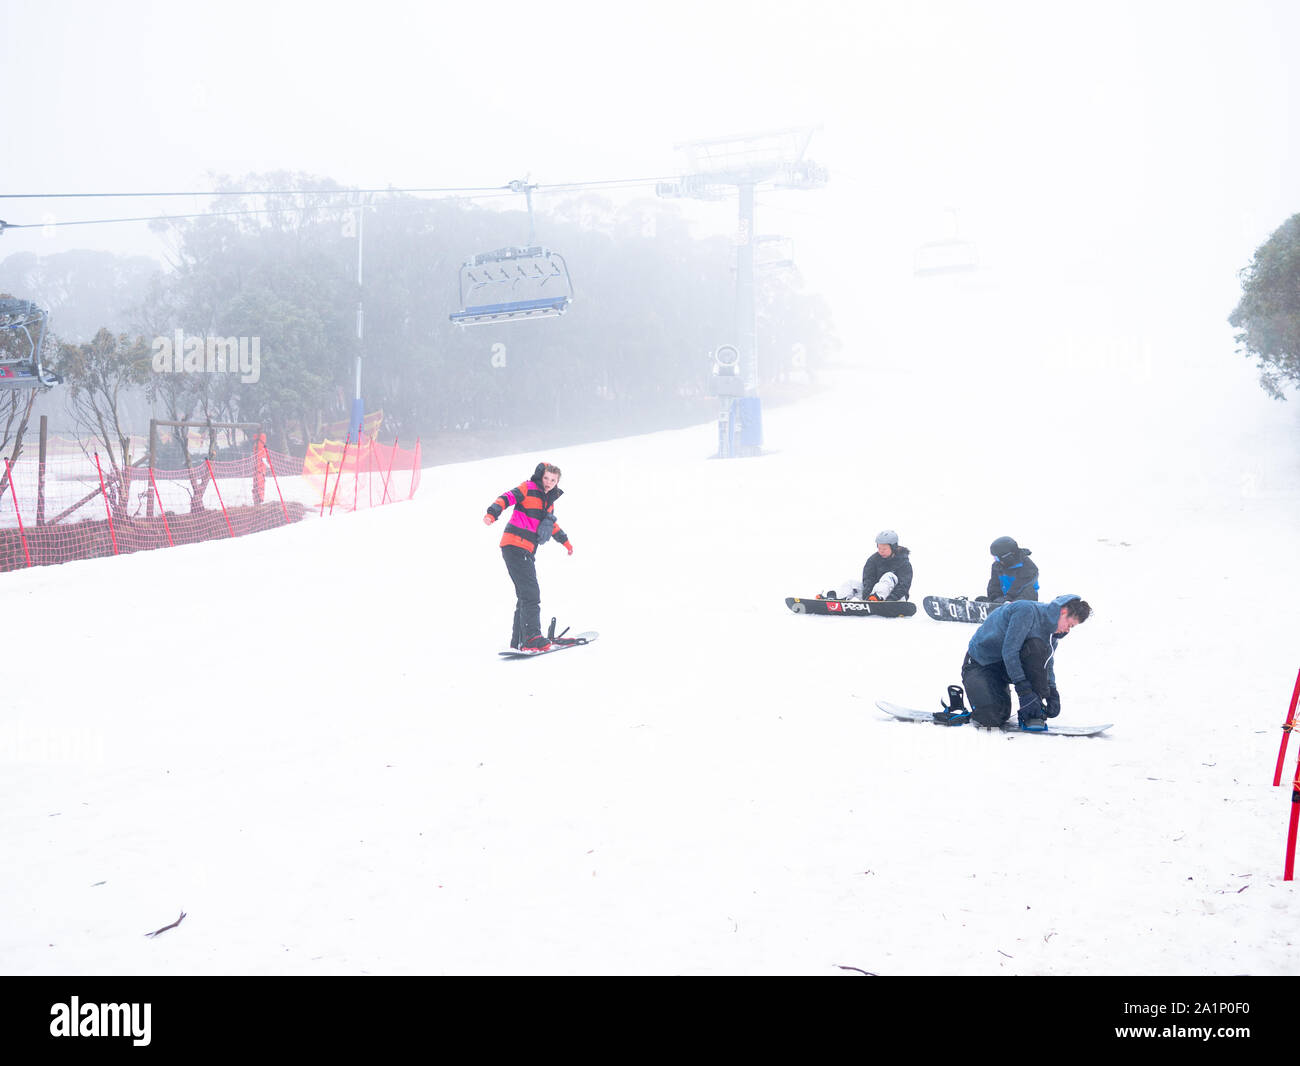 People skiing on snow in Mount Stiling Forest, Saturday 21 September 2019, Australia. Stock Photo